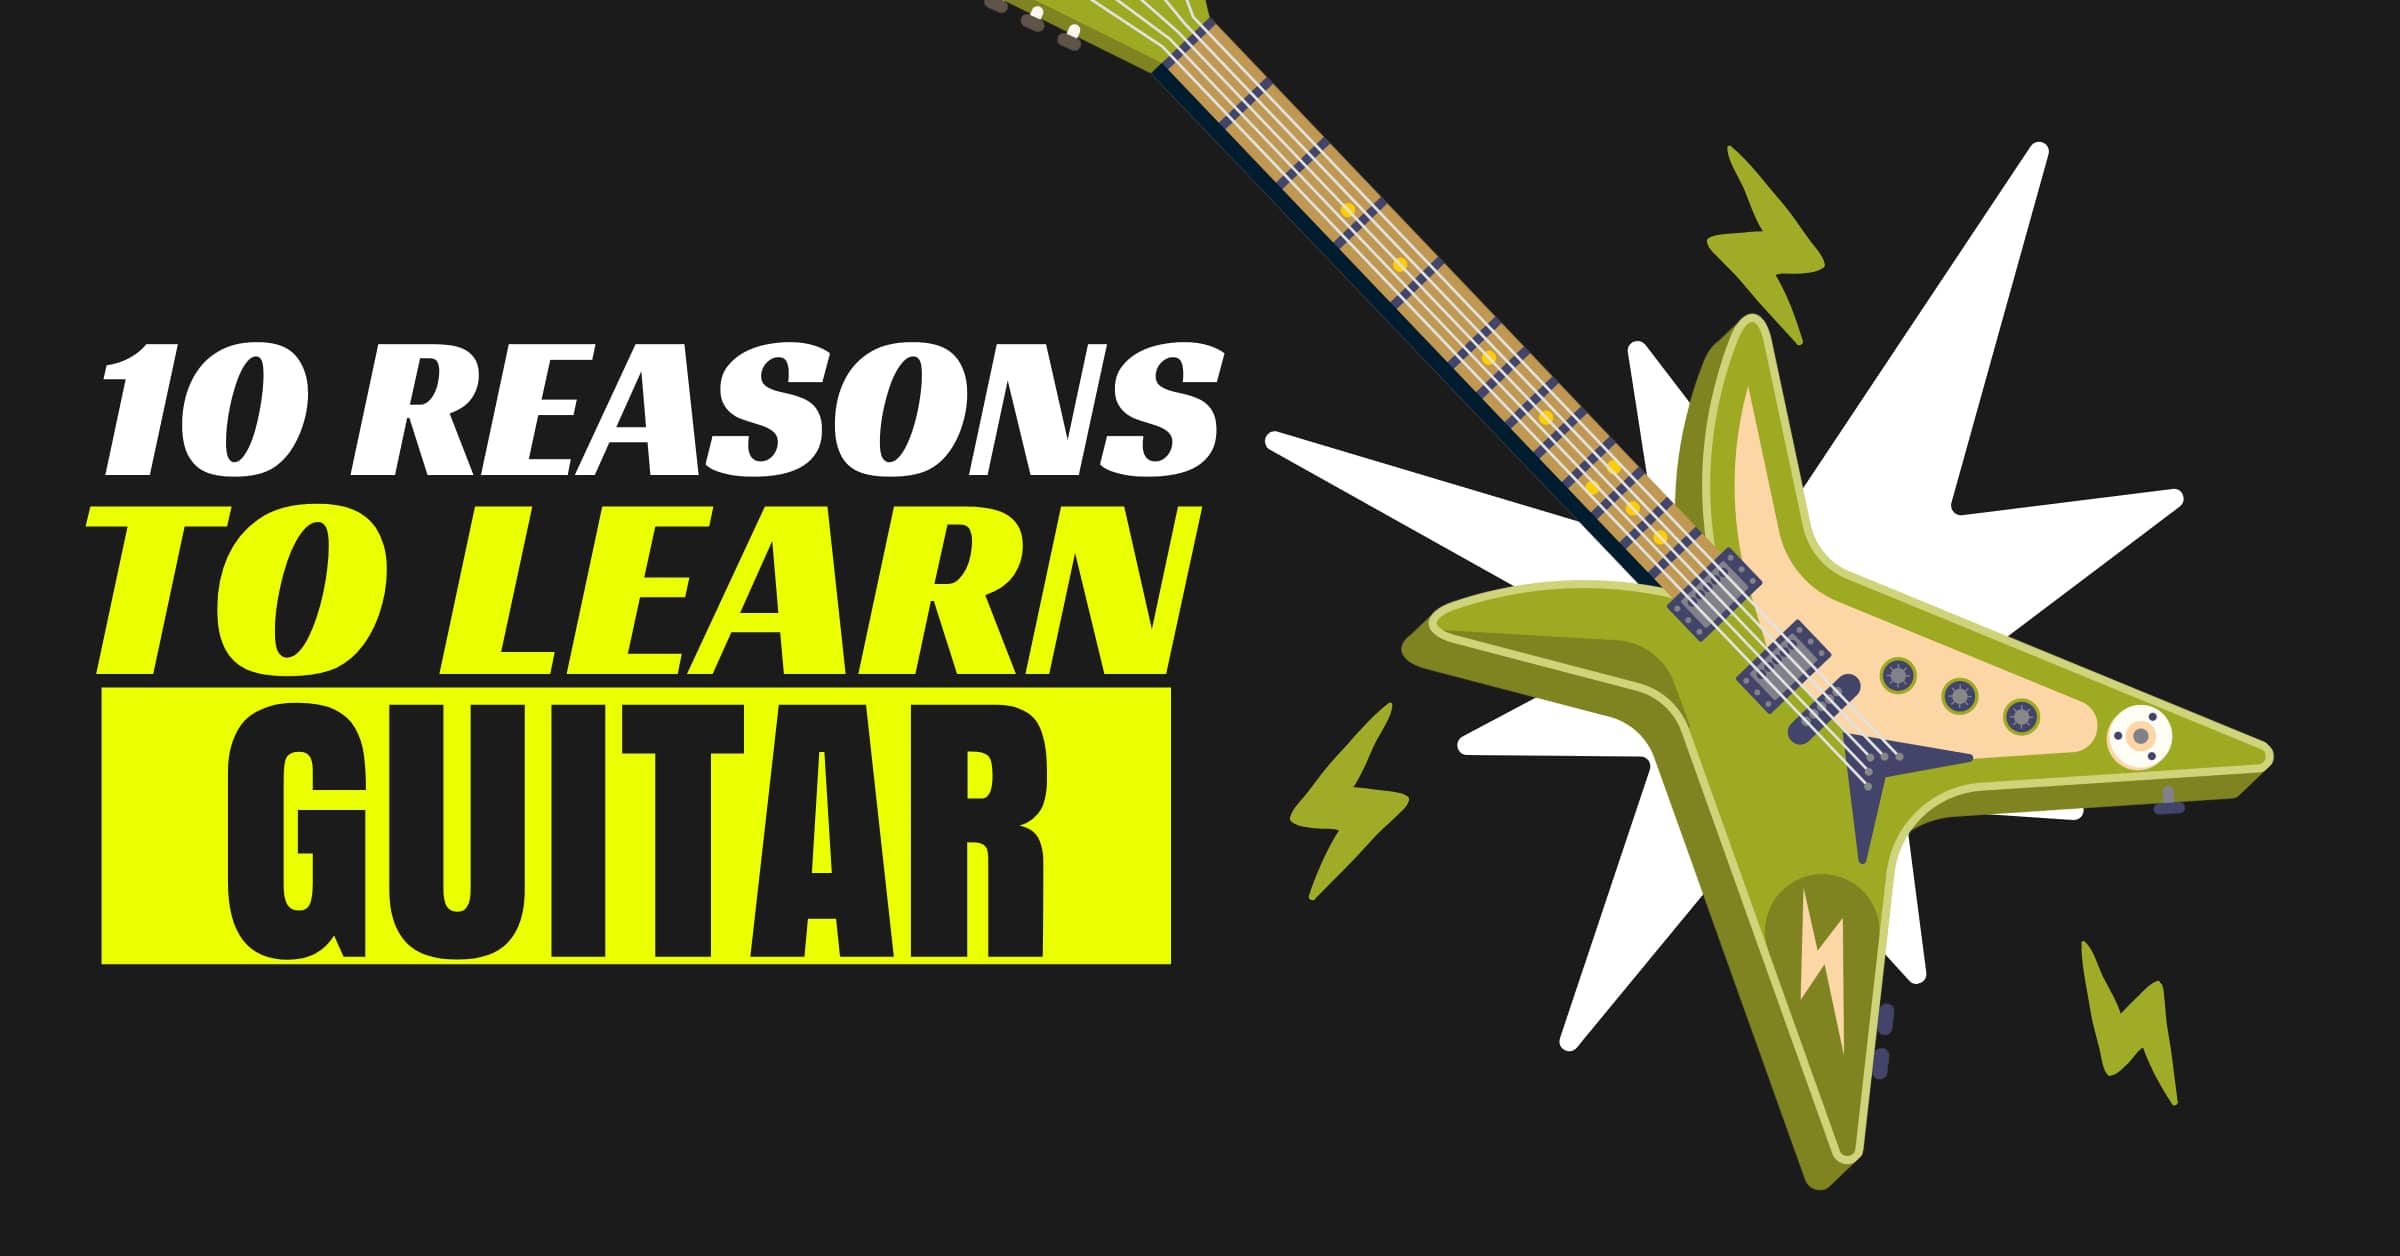 10 REASONS TO LEARN GUITAR